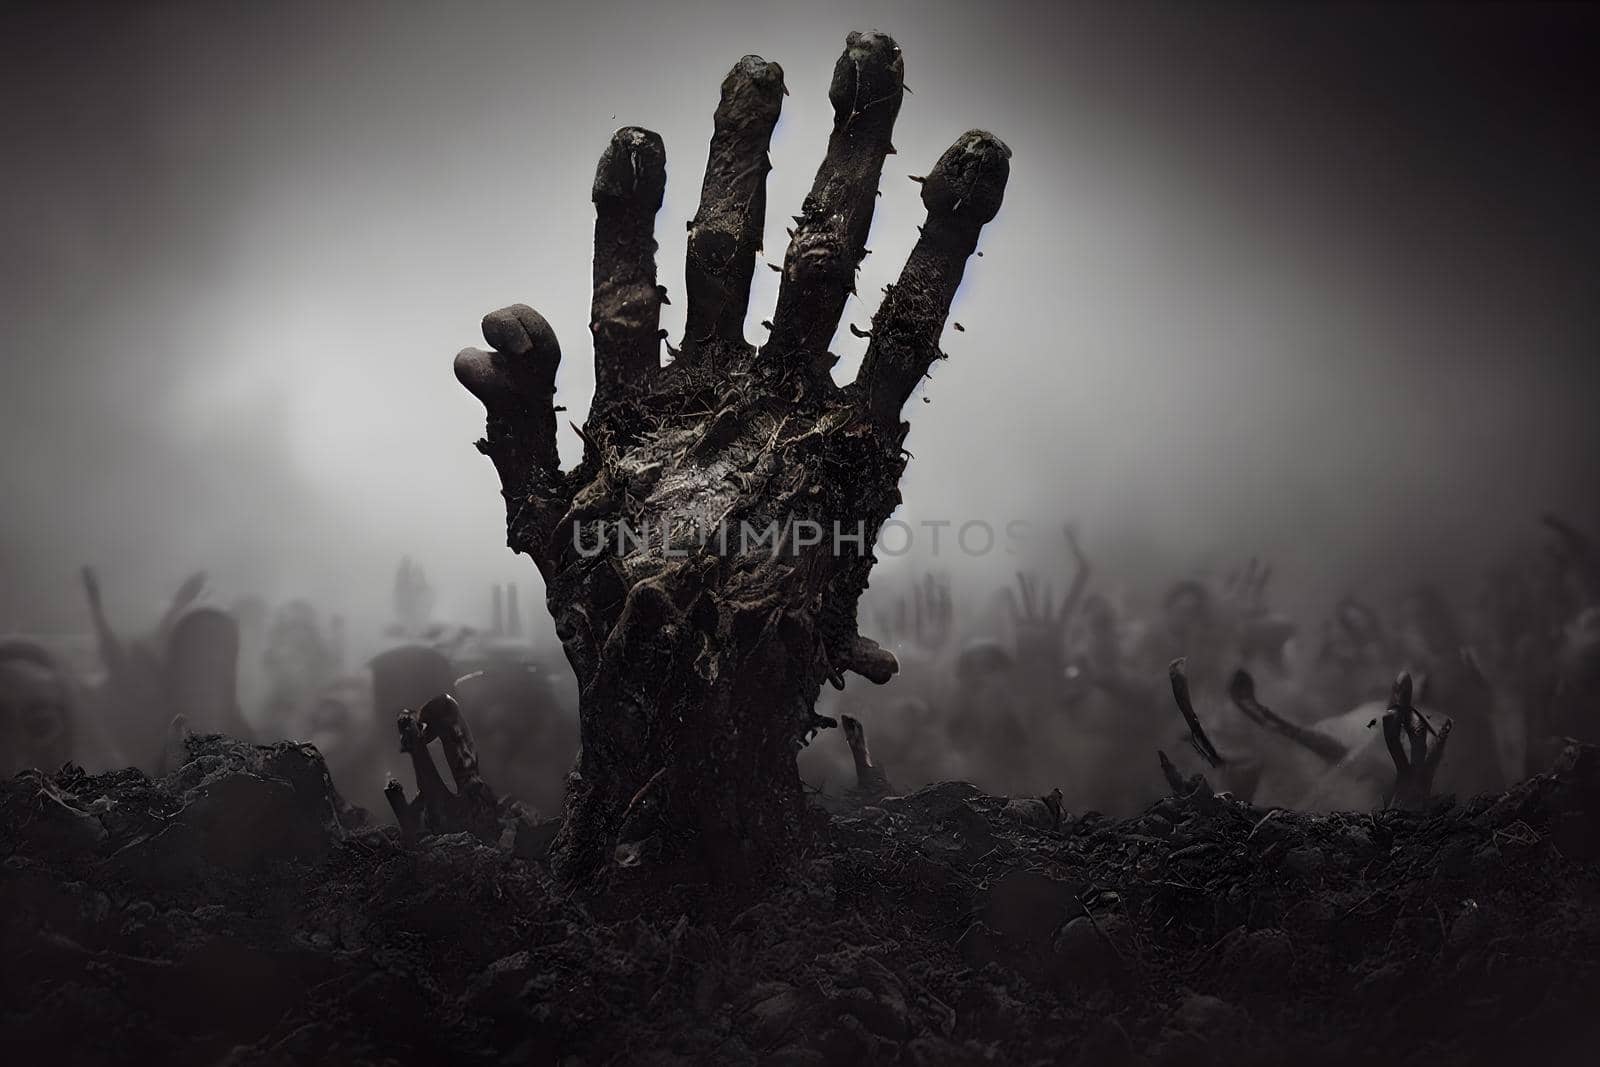 zombie hand rising up from grave in misty night graveyard, neural network generated art by z1b